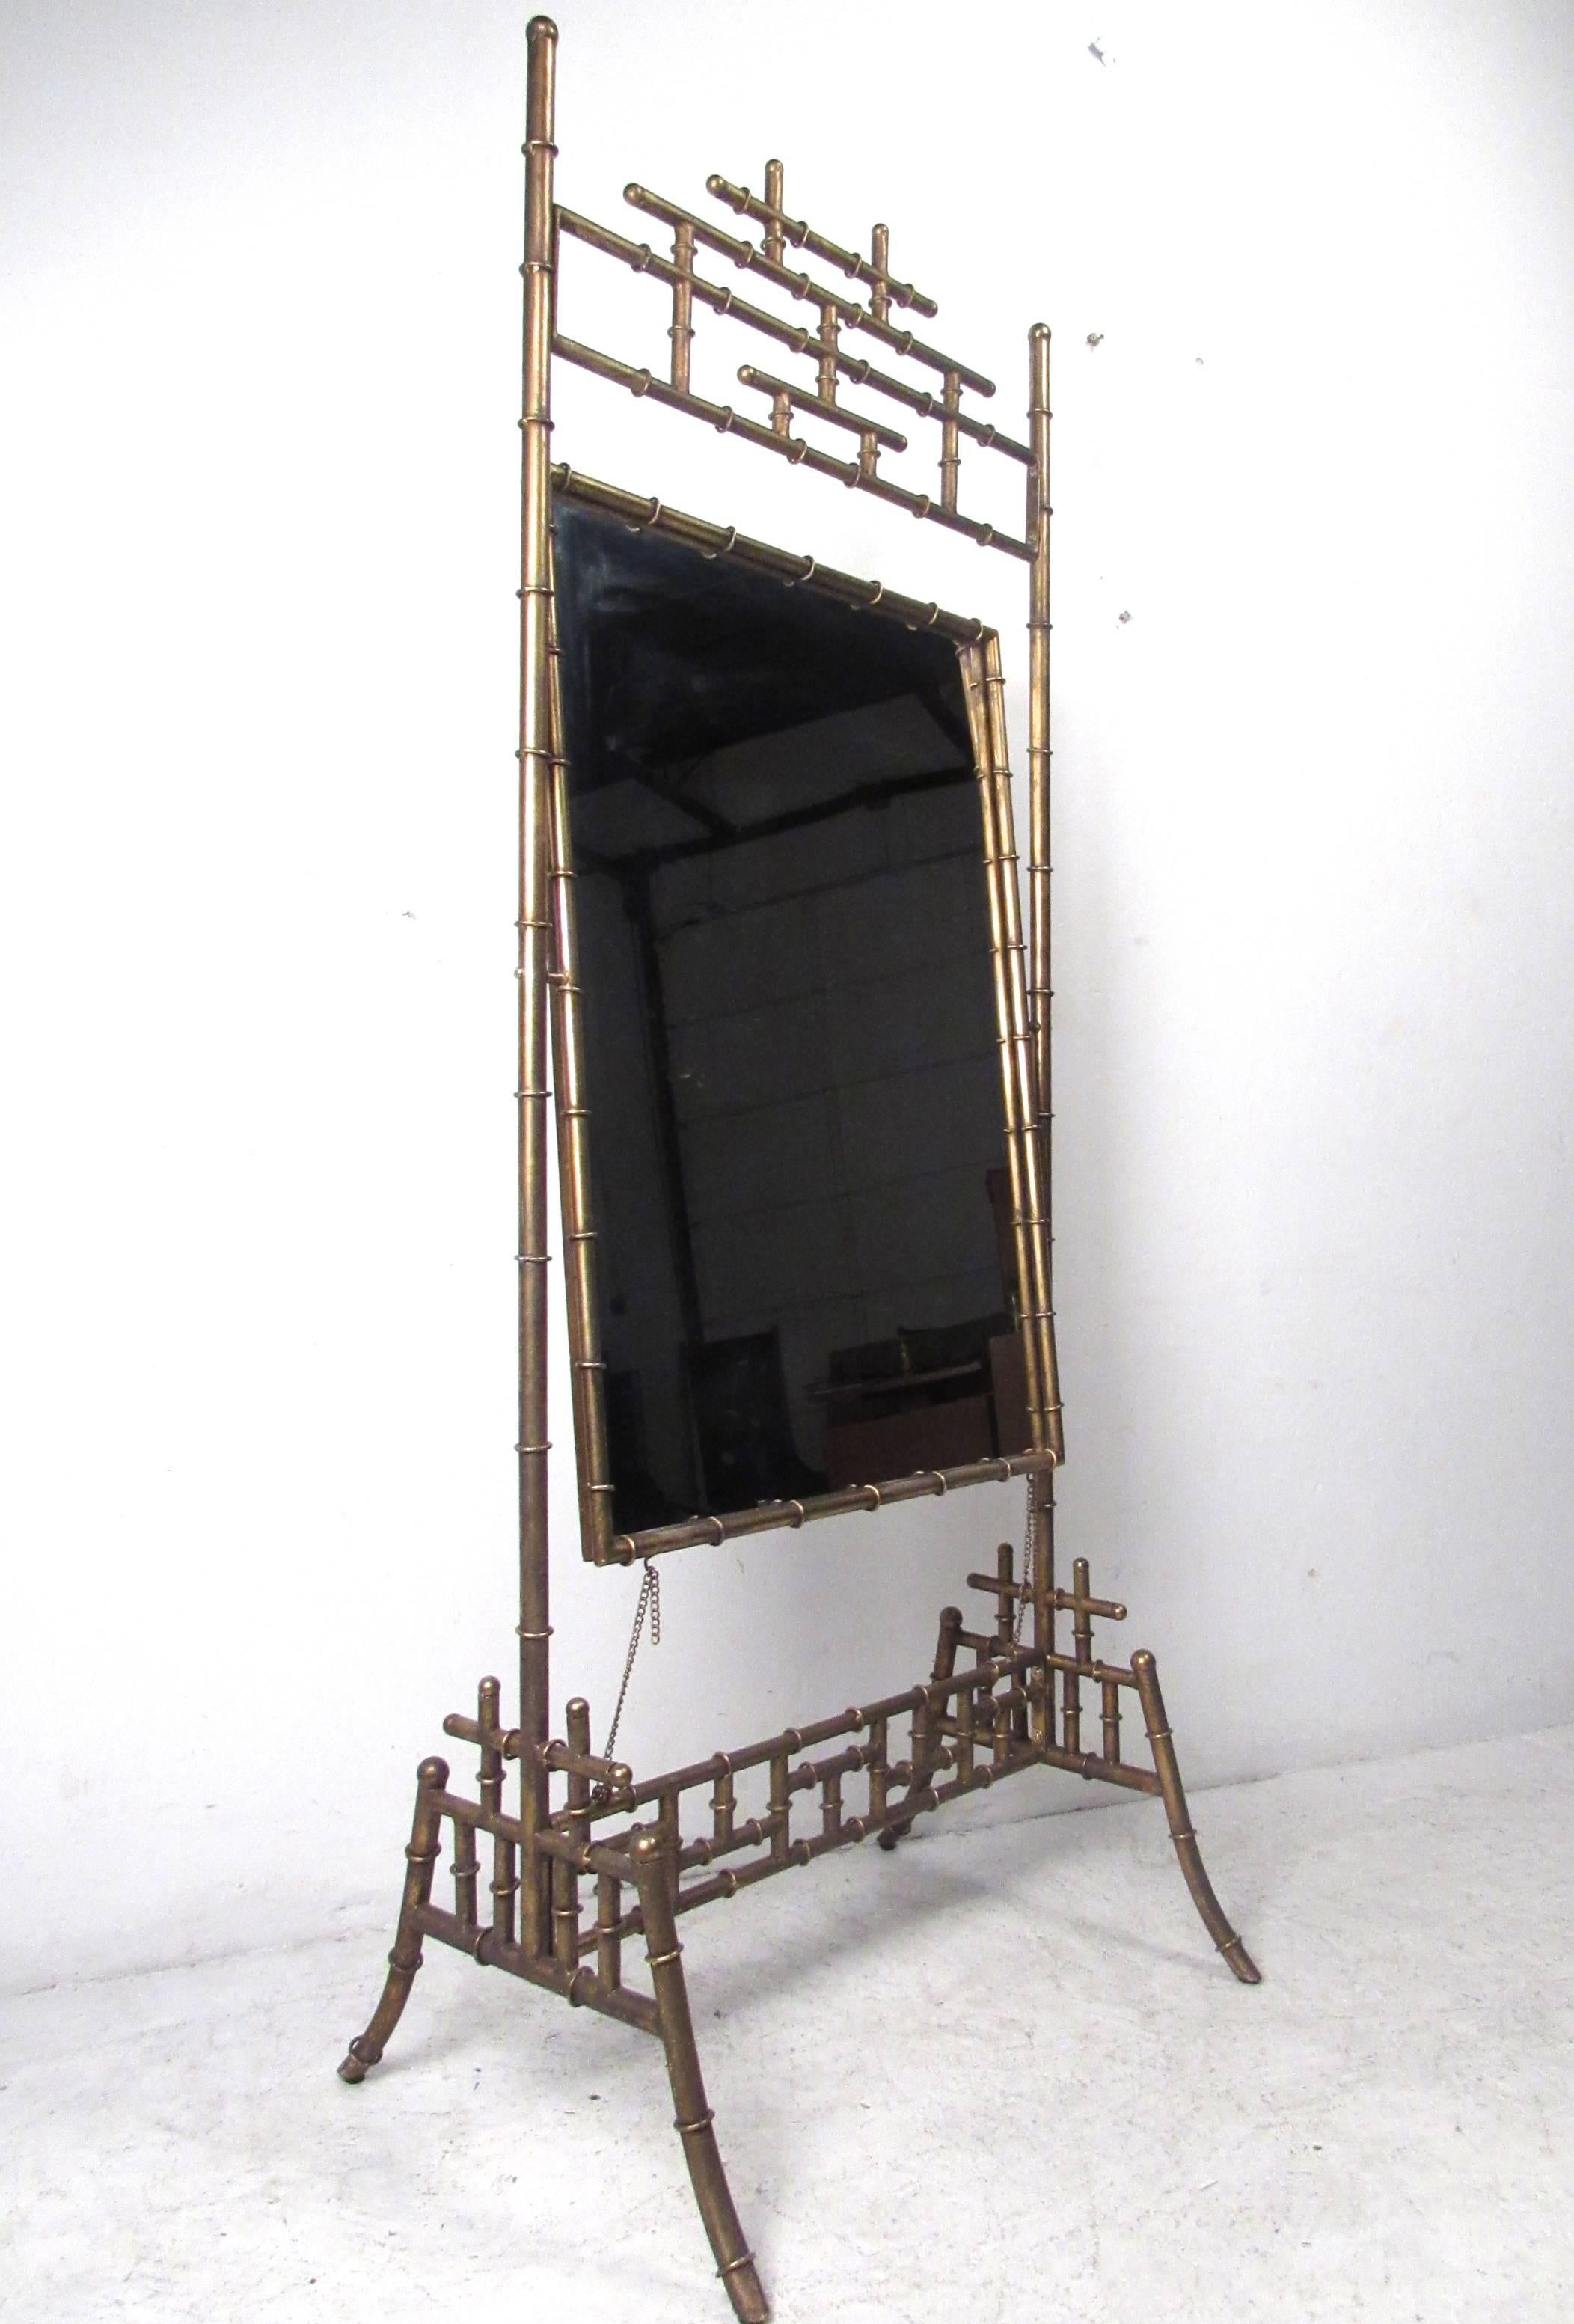 This unique vintage mirror features a stylish Asian motif, gold leaf finish, faux bamboo frame, and pivots neatly in it's sturdy four leg frame. Perfect mirror for bedroom, dressing room, or business decor. Please confirm item location, NY or NJ.